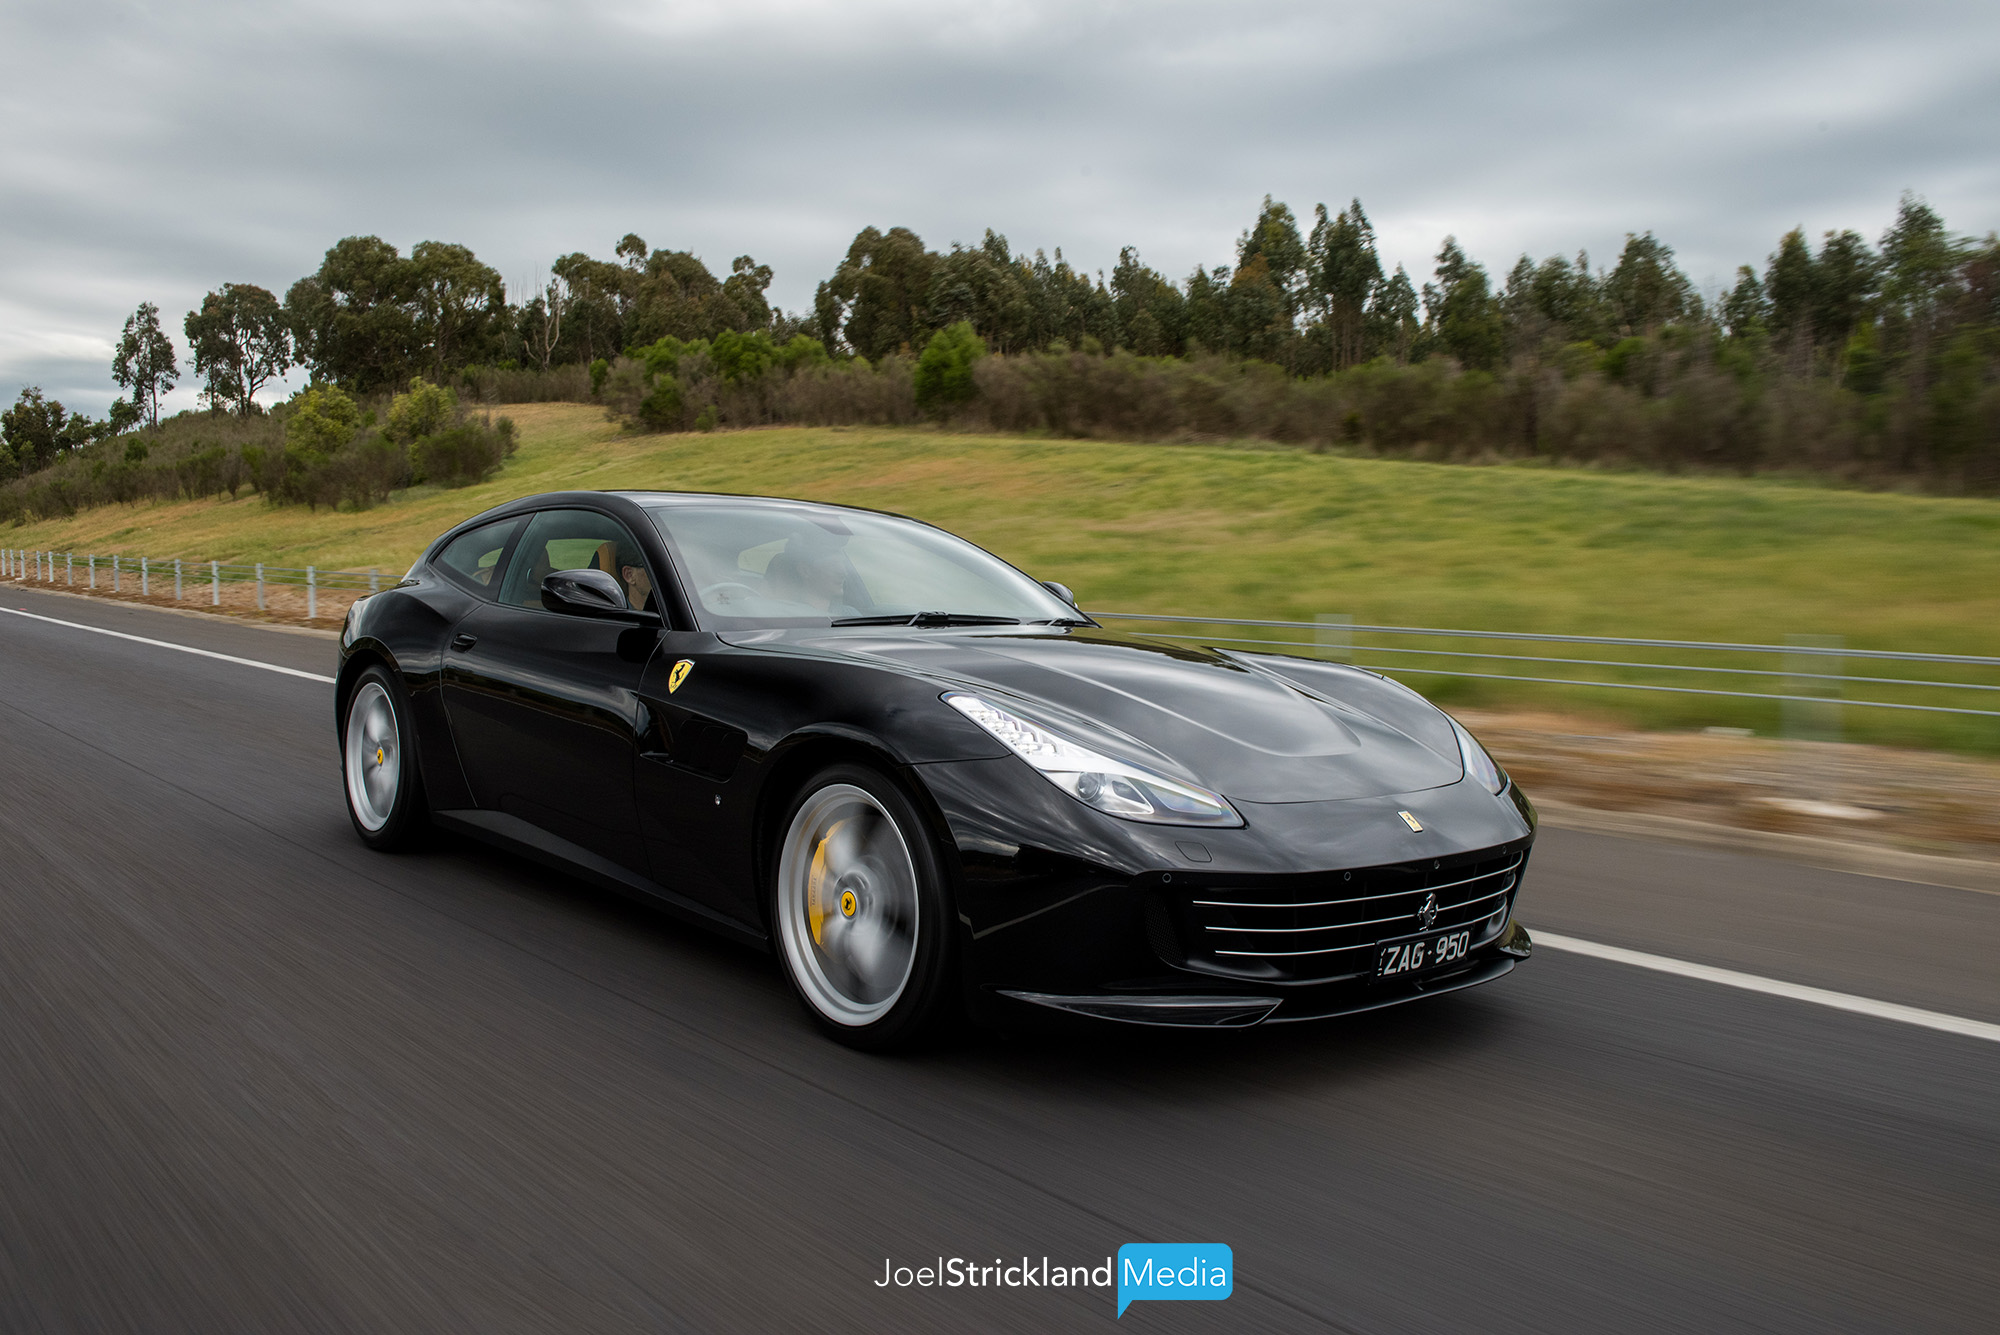 Favourites images of 2017 – Behind the lens – Ferrari GT4C Lusso